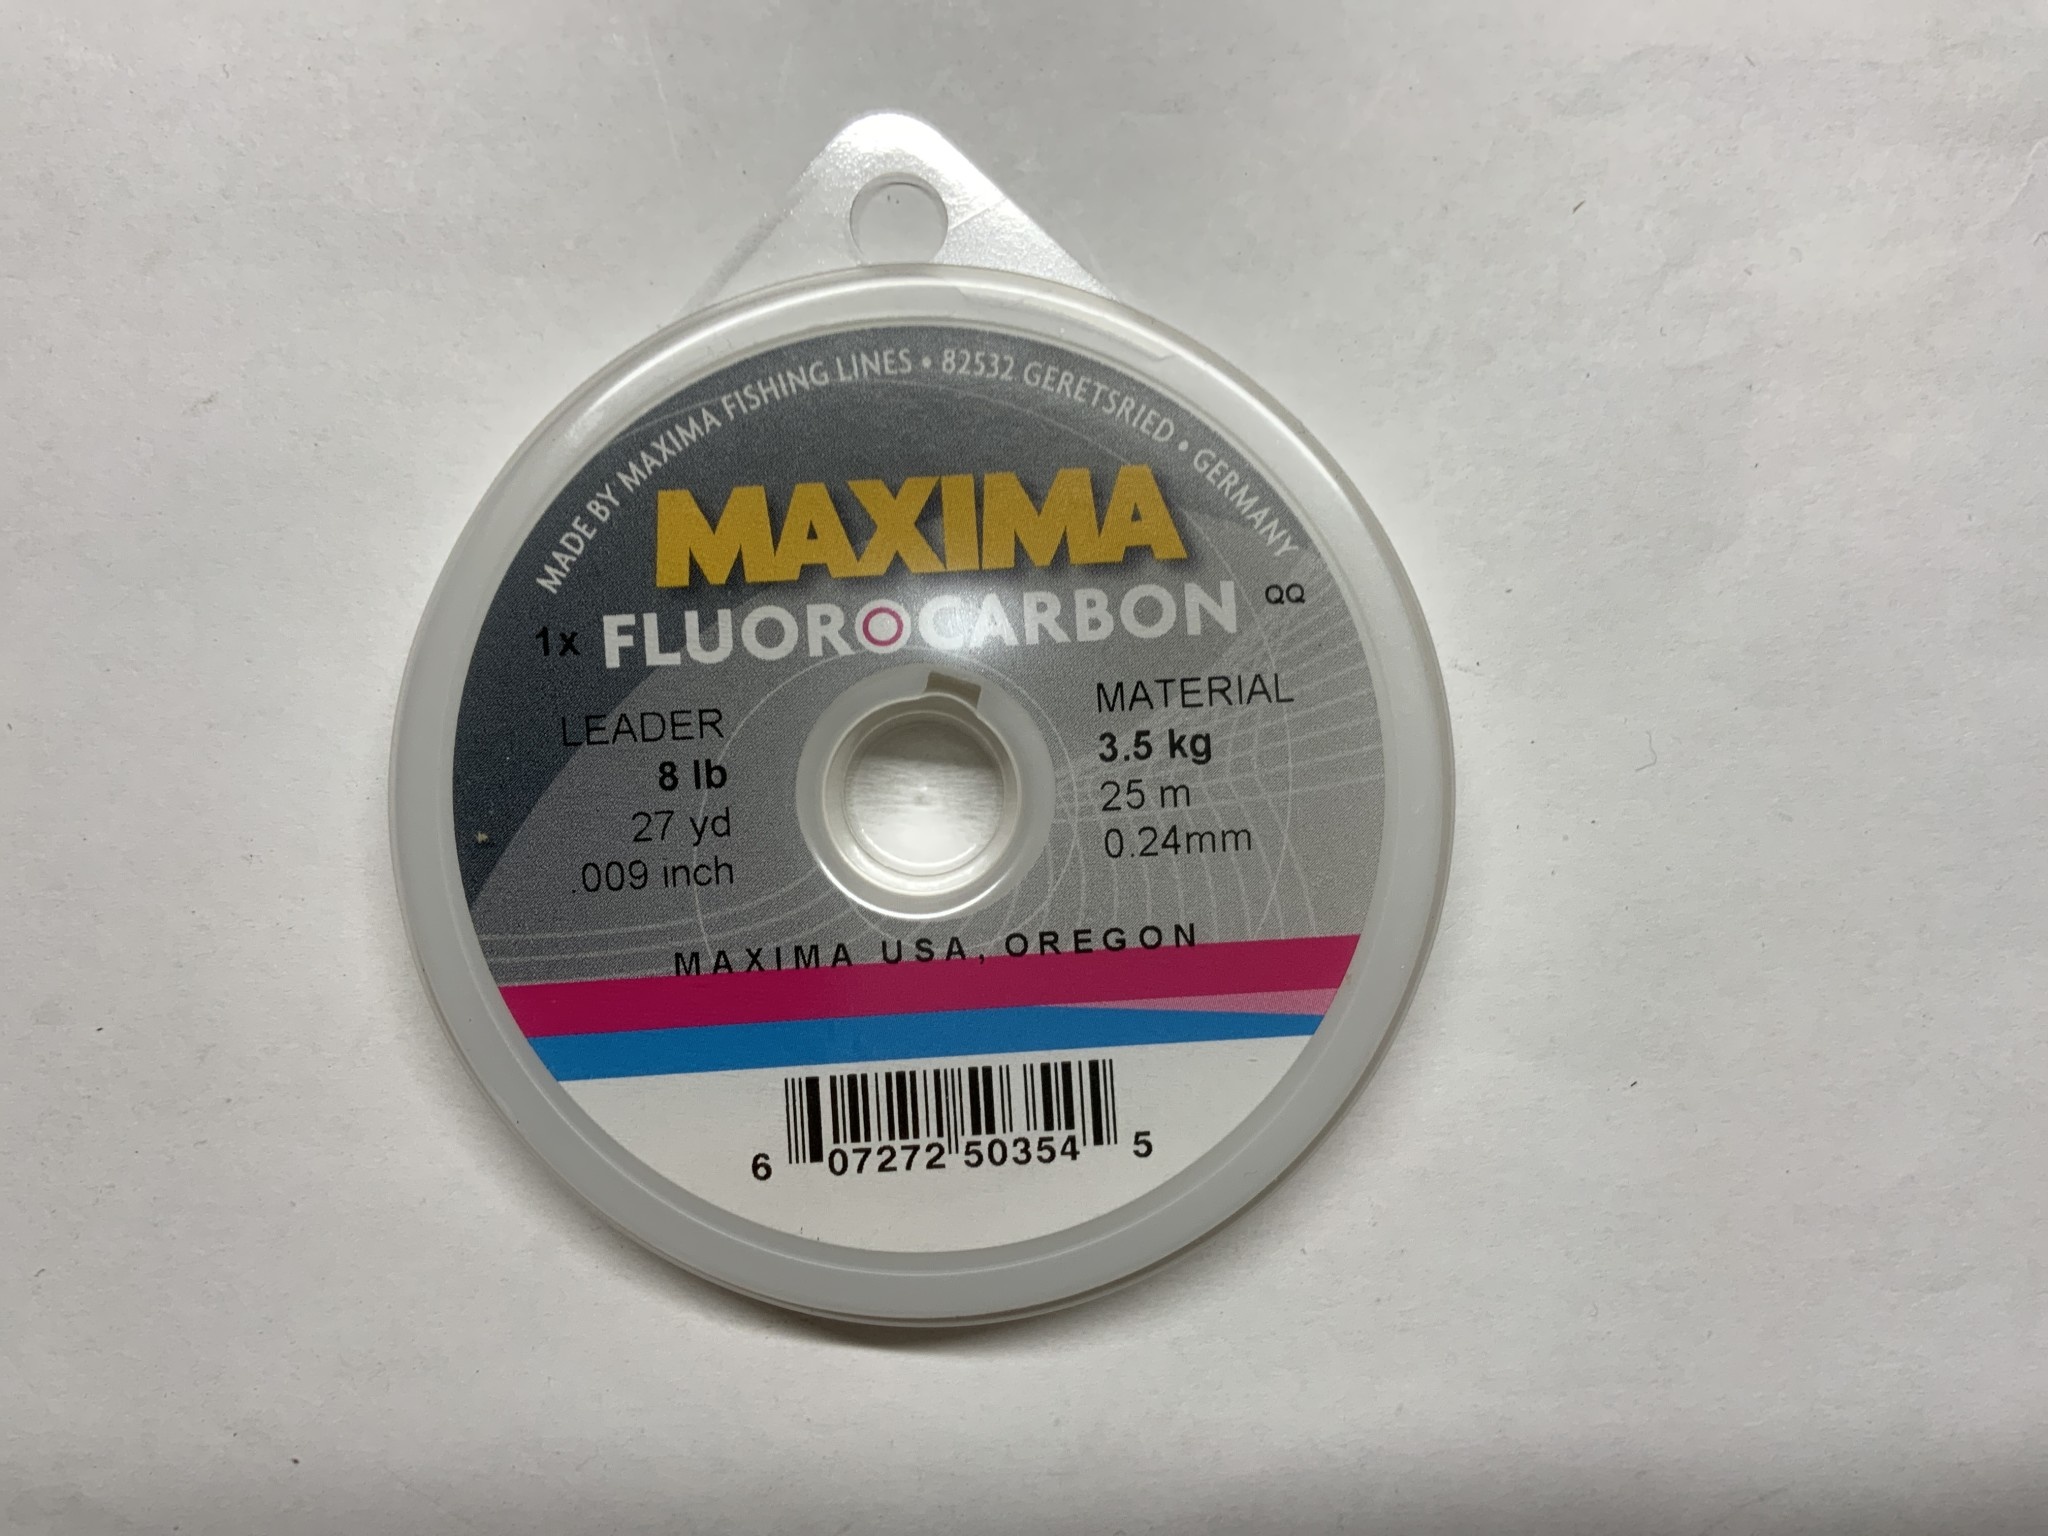 Maxima Fluorocarbon Leader Material 27 YD - All Seasons Sports